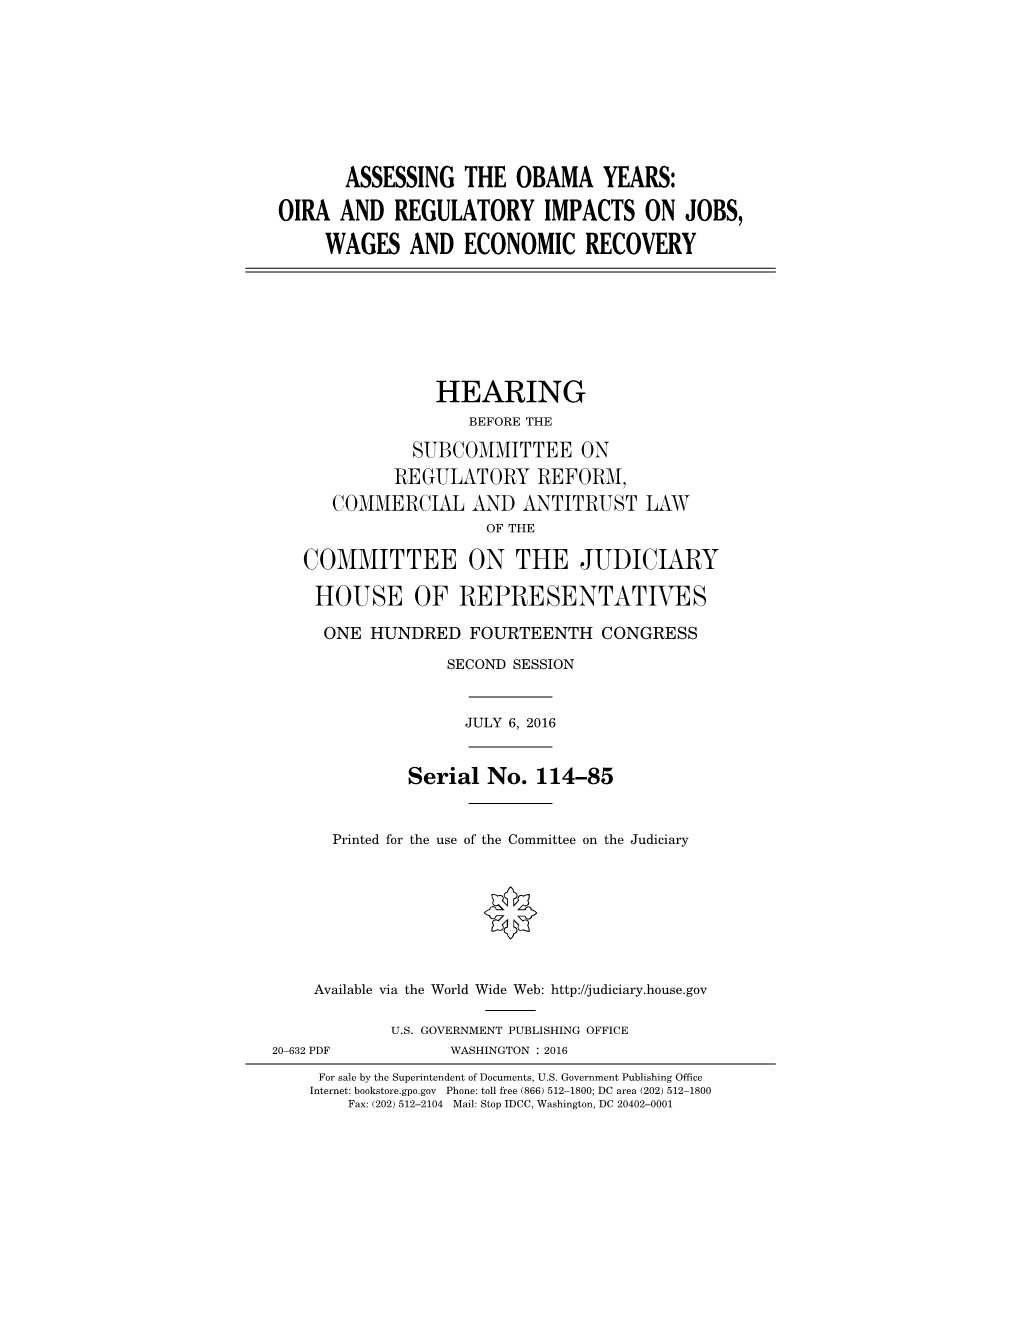 Assessing the Obama Years: Oira and Regulatory Impacts on Jobs, Wages and Economic Recovery